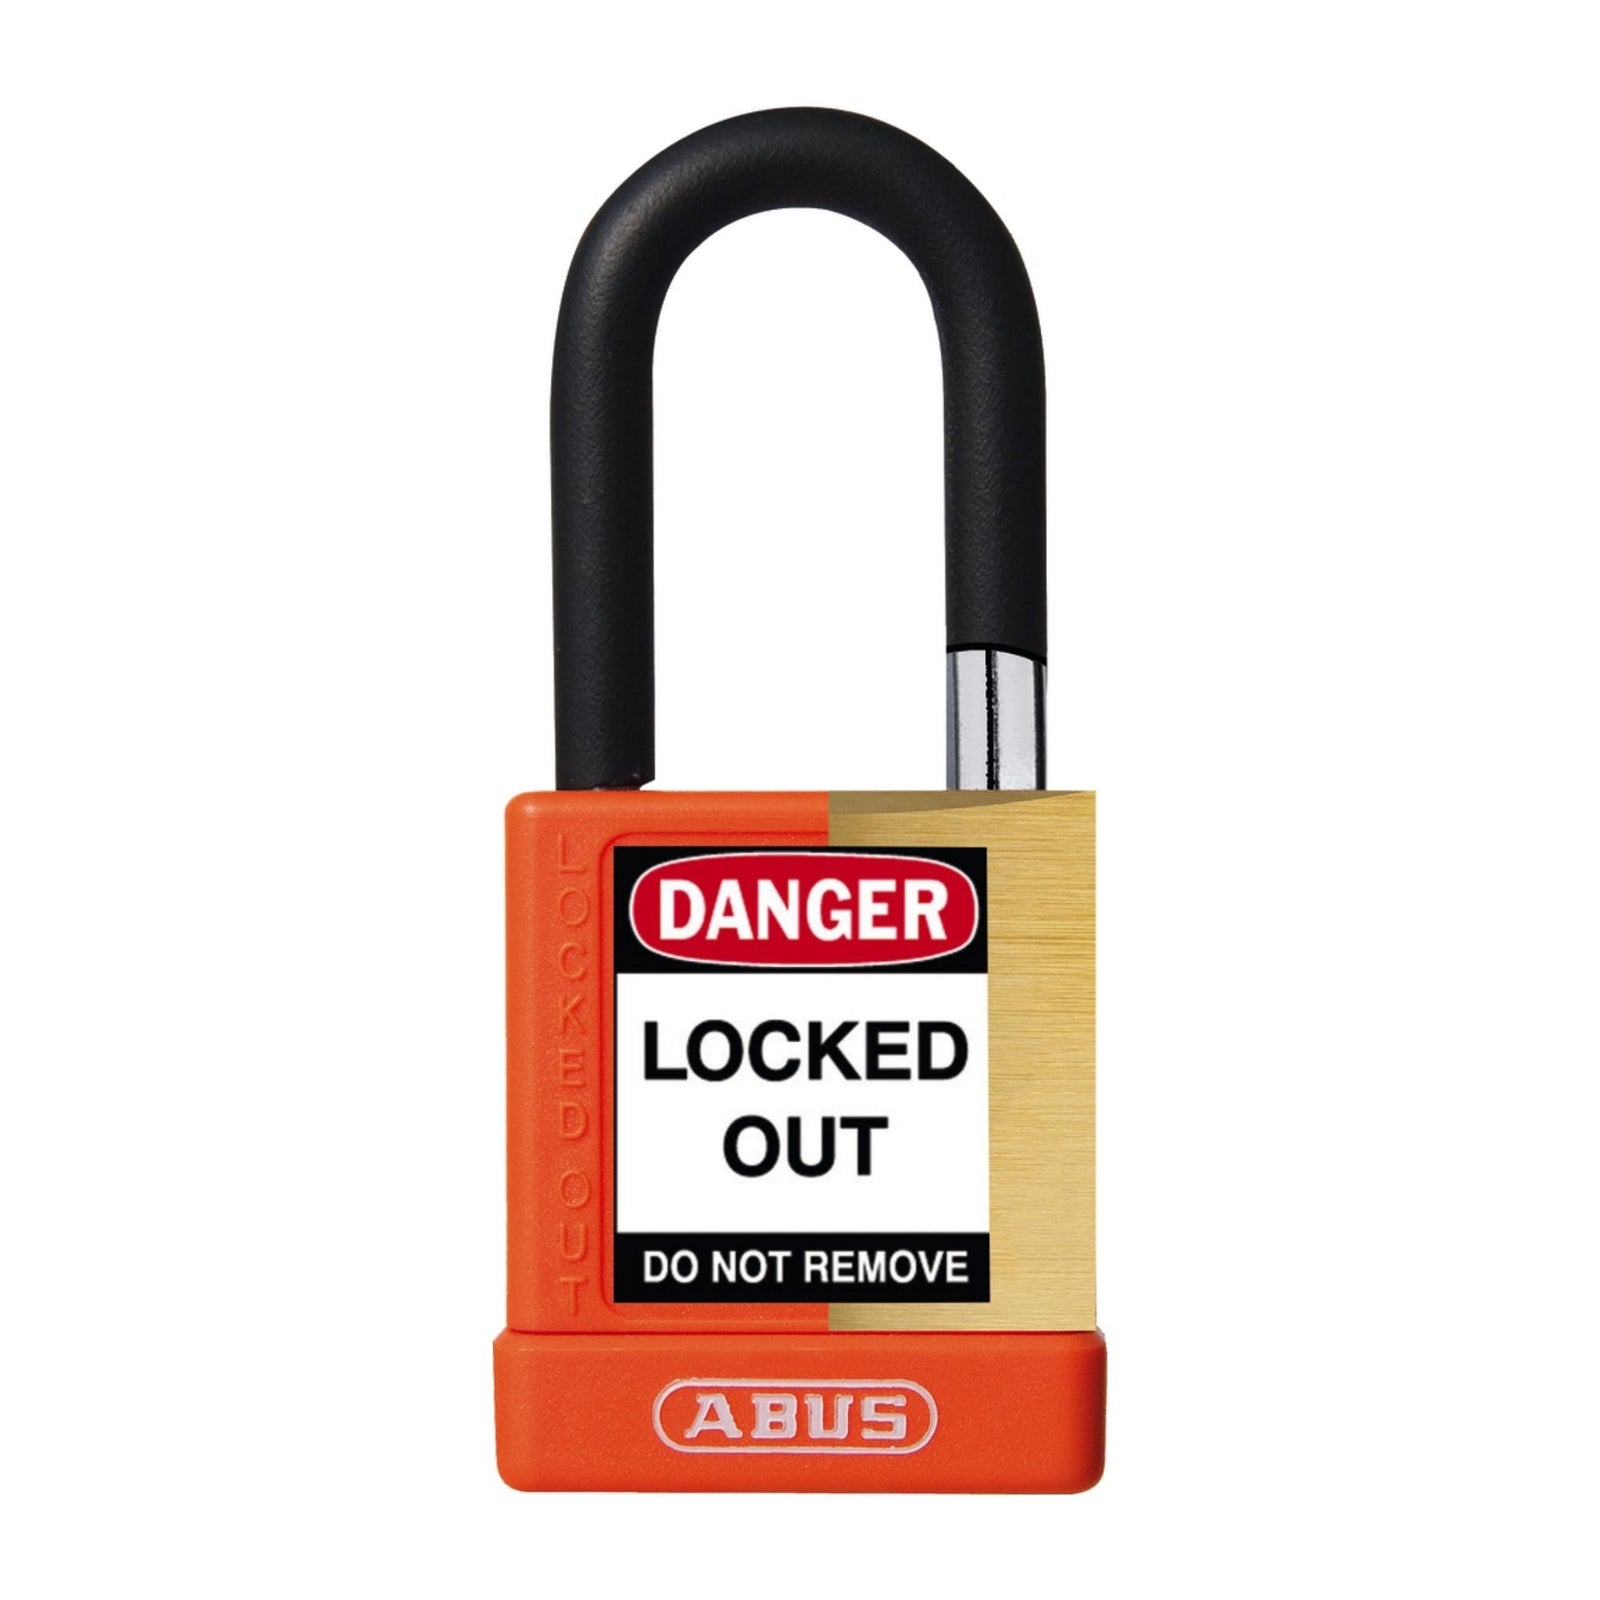 https://www.thelocksource.com/cdn/shop/products/Abus_74M_40_Orange_Safety_Lock_Brass_Body_Insulated_with_Plastic_Cover_-_The_Lock_Source_42371e43-981d-4fcf-aadd-2dad1af62f1d_1600x.jpg?v=1629052717